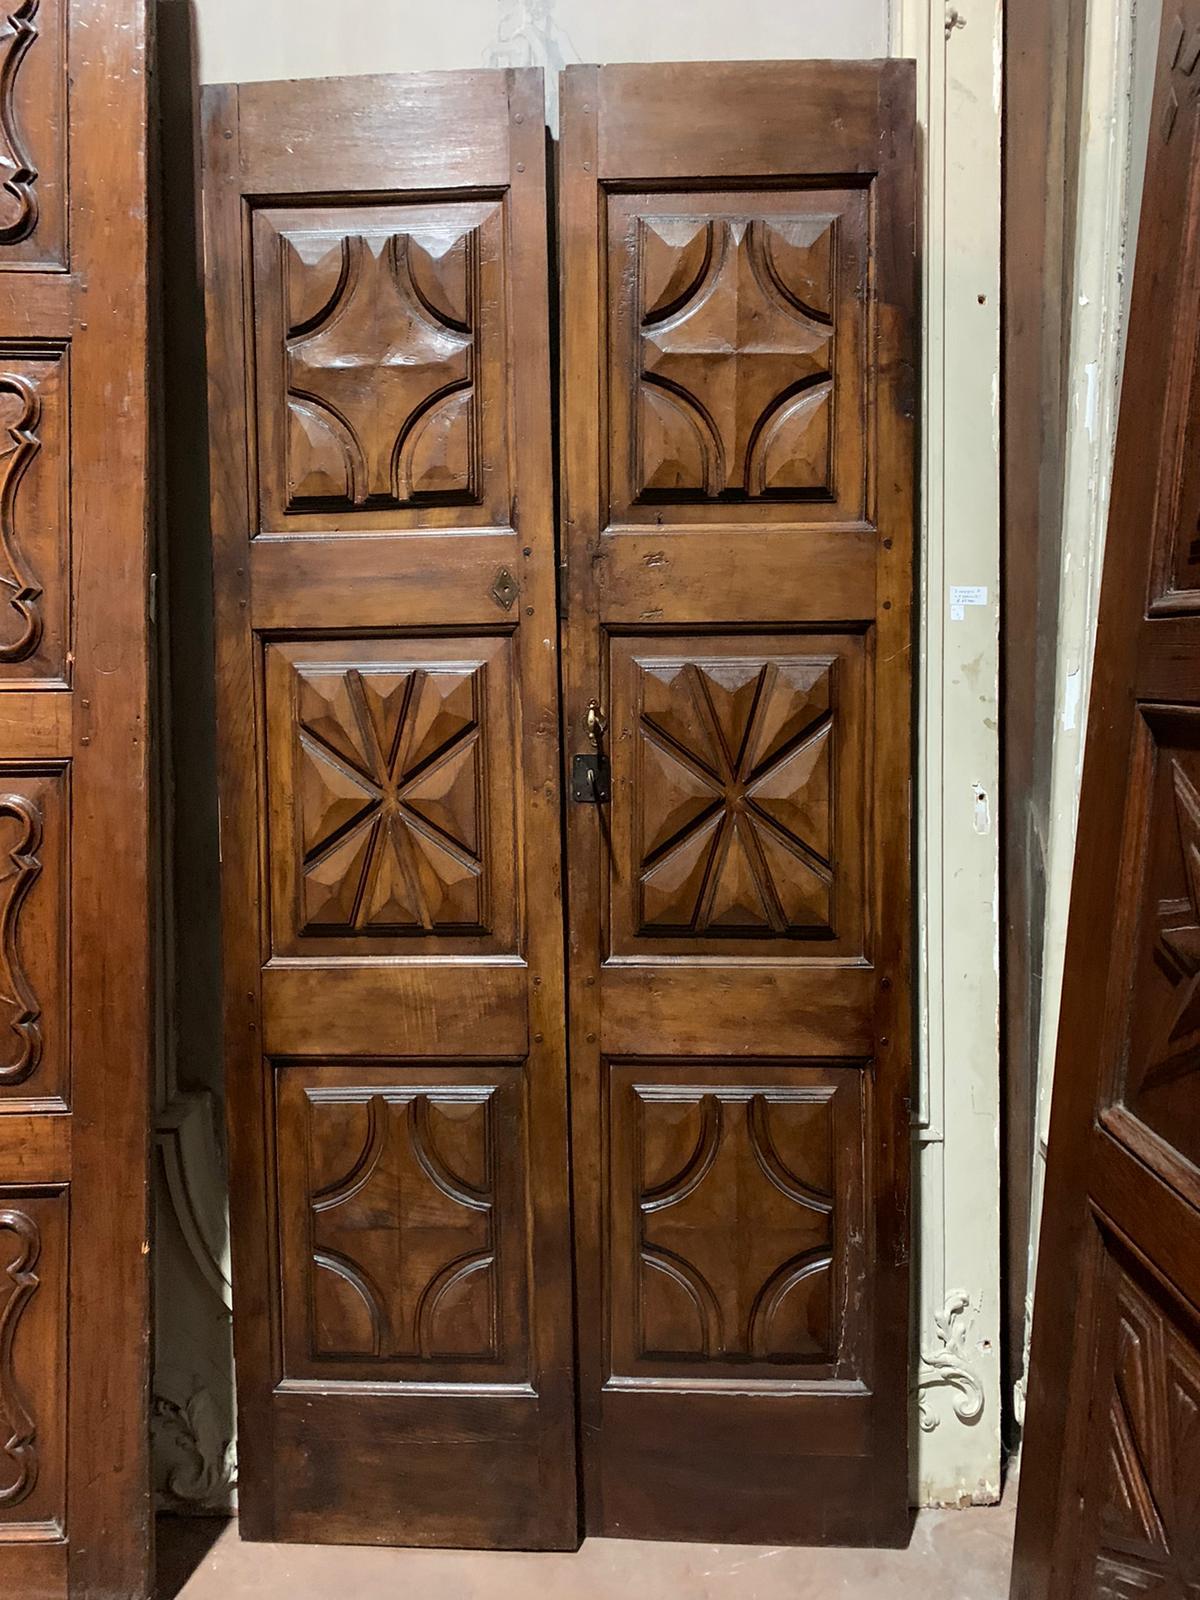 Important and very Antique double-wing interior door (or entrance door), entirely hand-carved in precious solid wood, patinated and beautiful brown, precious walnut wood, very deep carved shapes (sign of great value of the commission) with diamonds